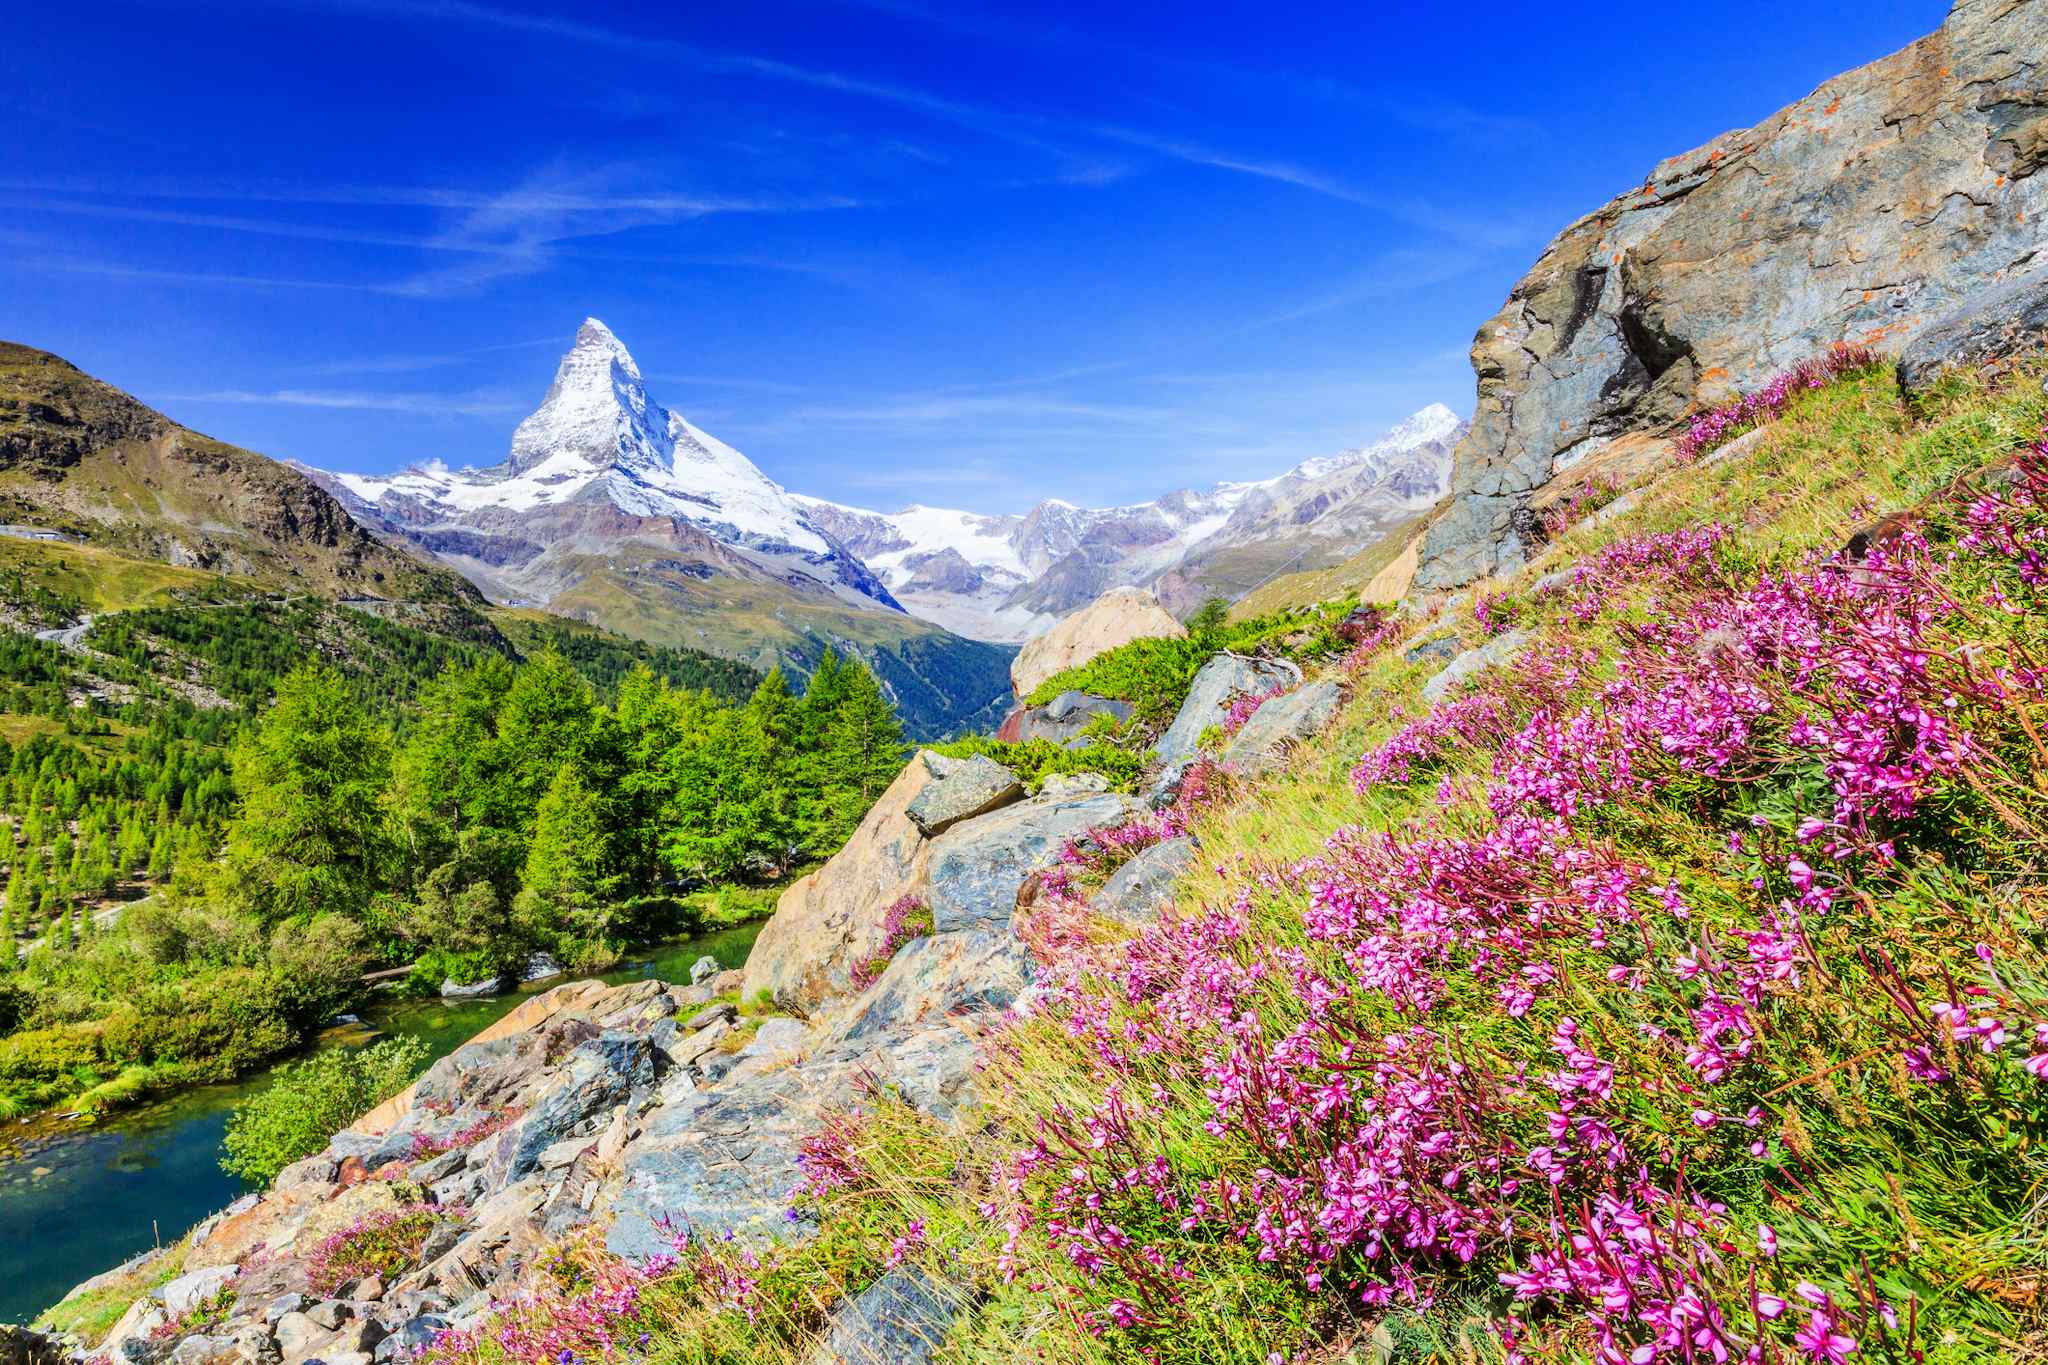 Wildflower meadows in front of the Matterhorn. Photo: Happy Tracks.